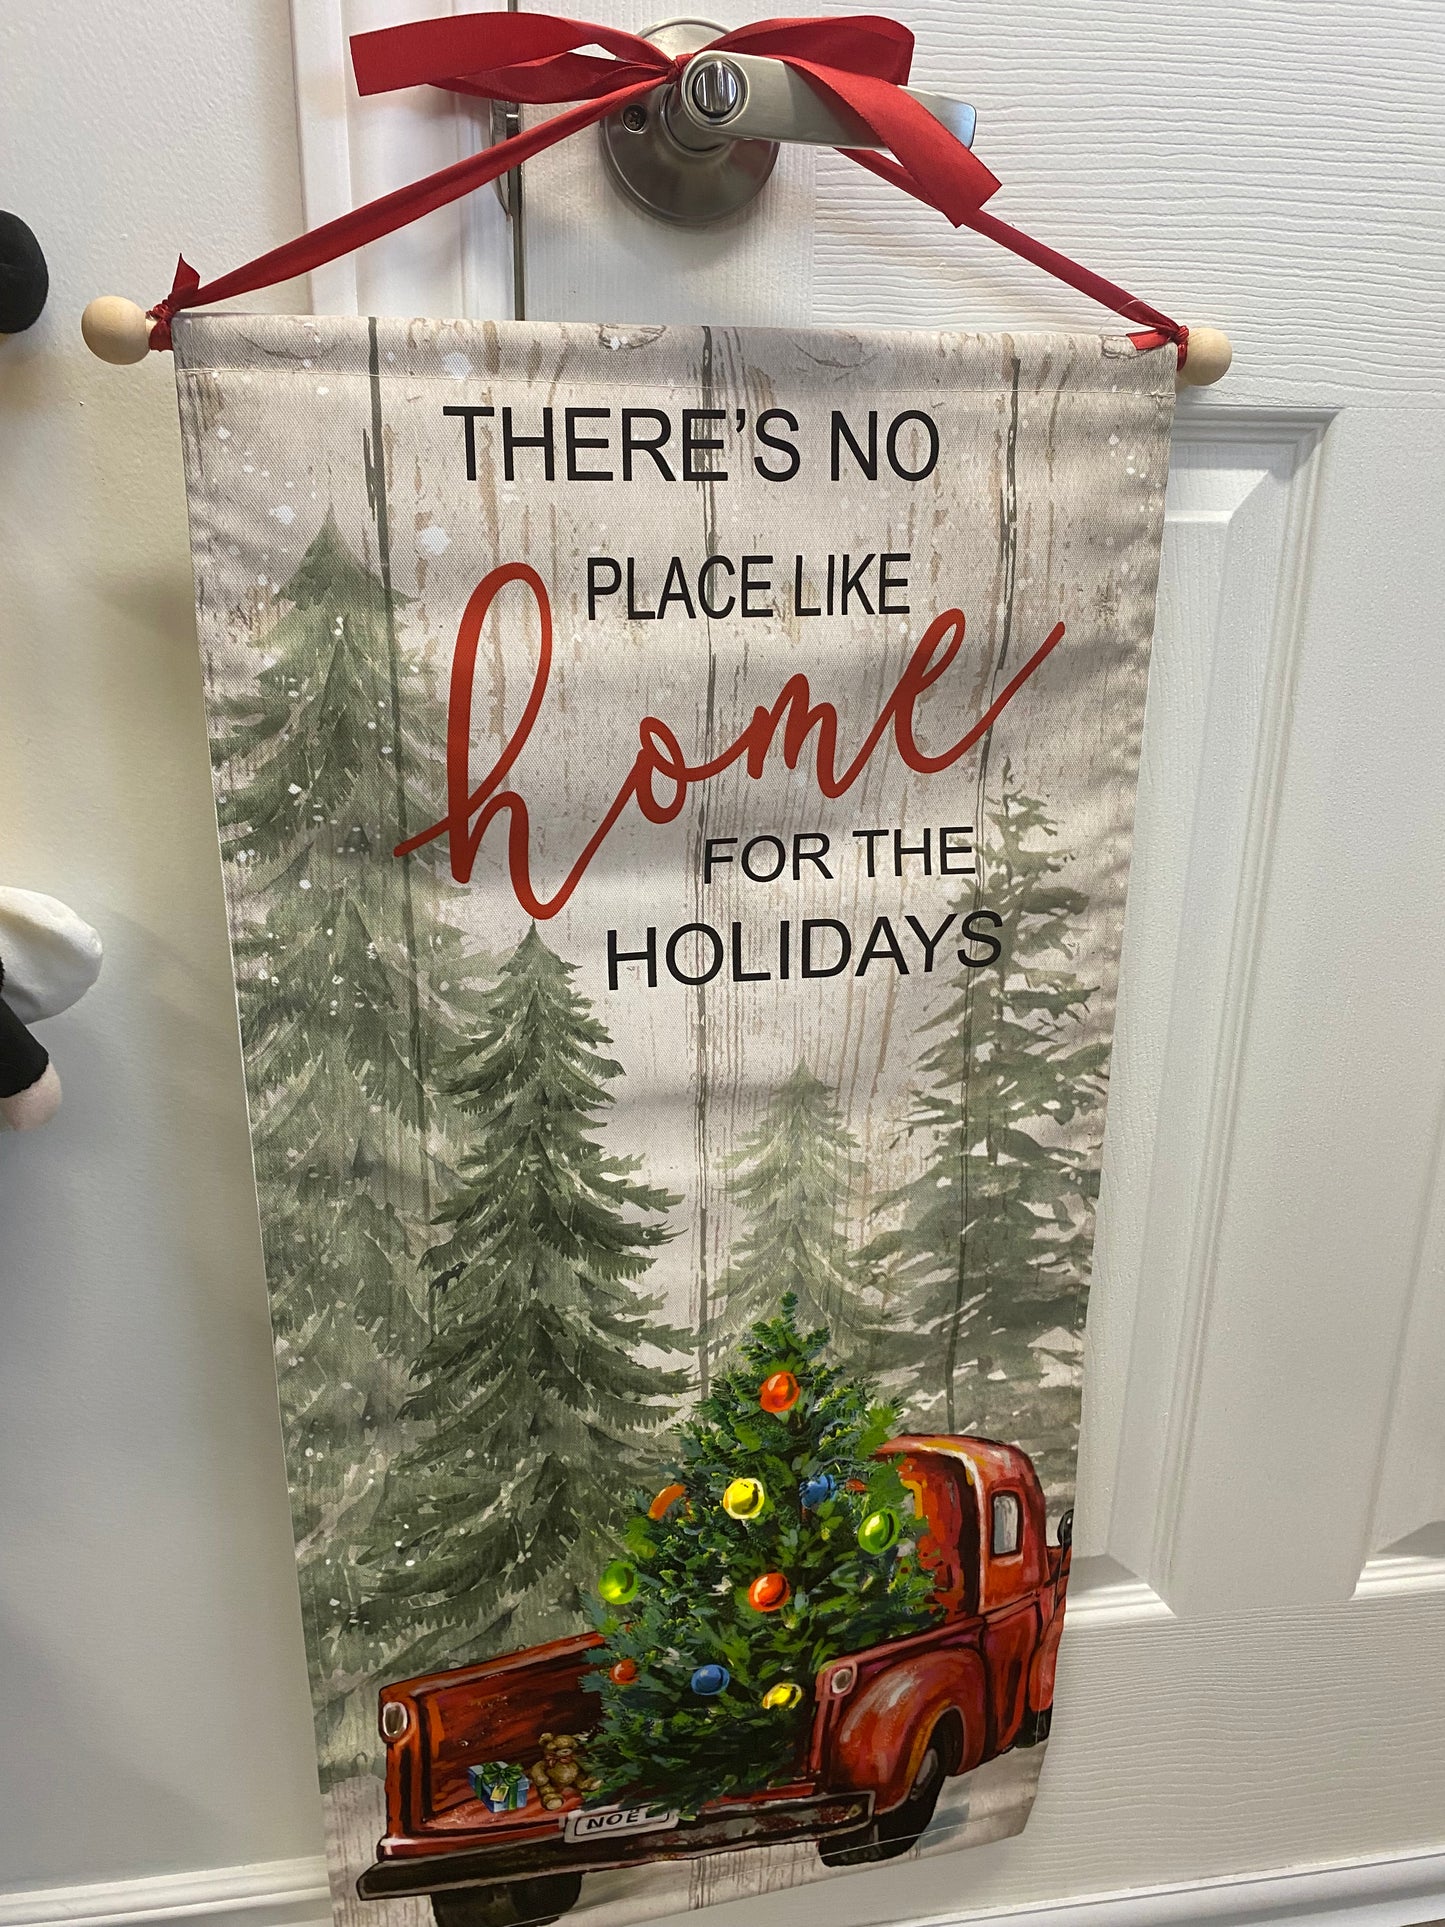 Christmas Banner with Sentiment “Theres No Place Like Home For the Holidays